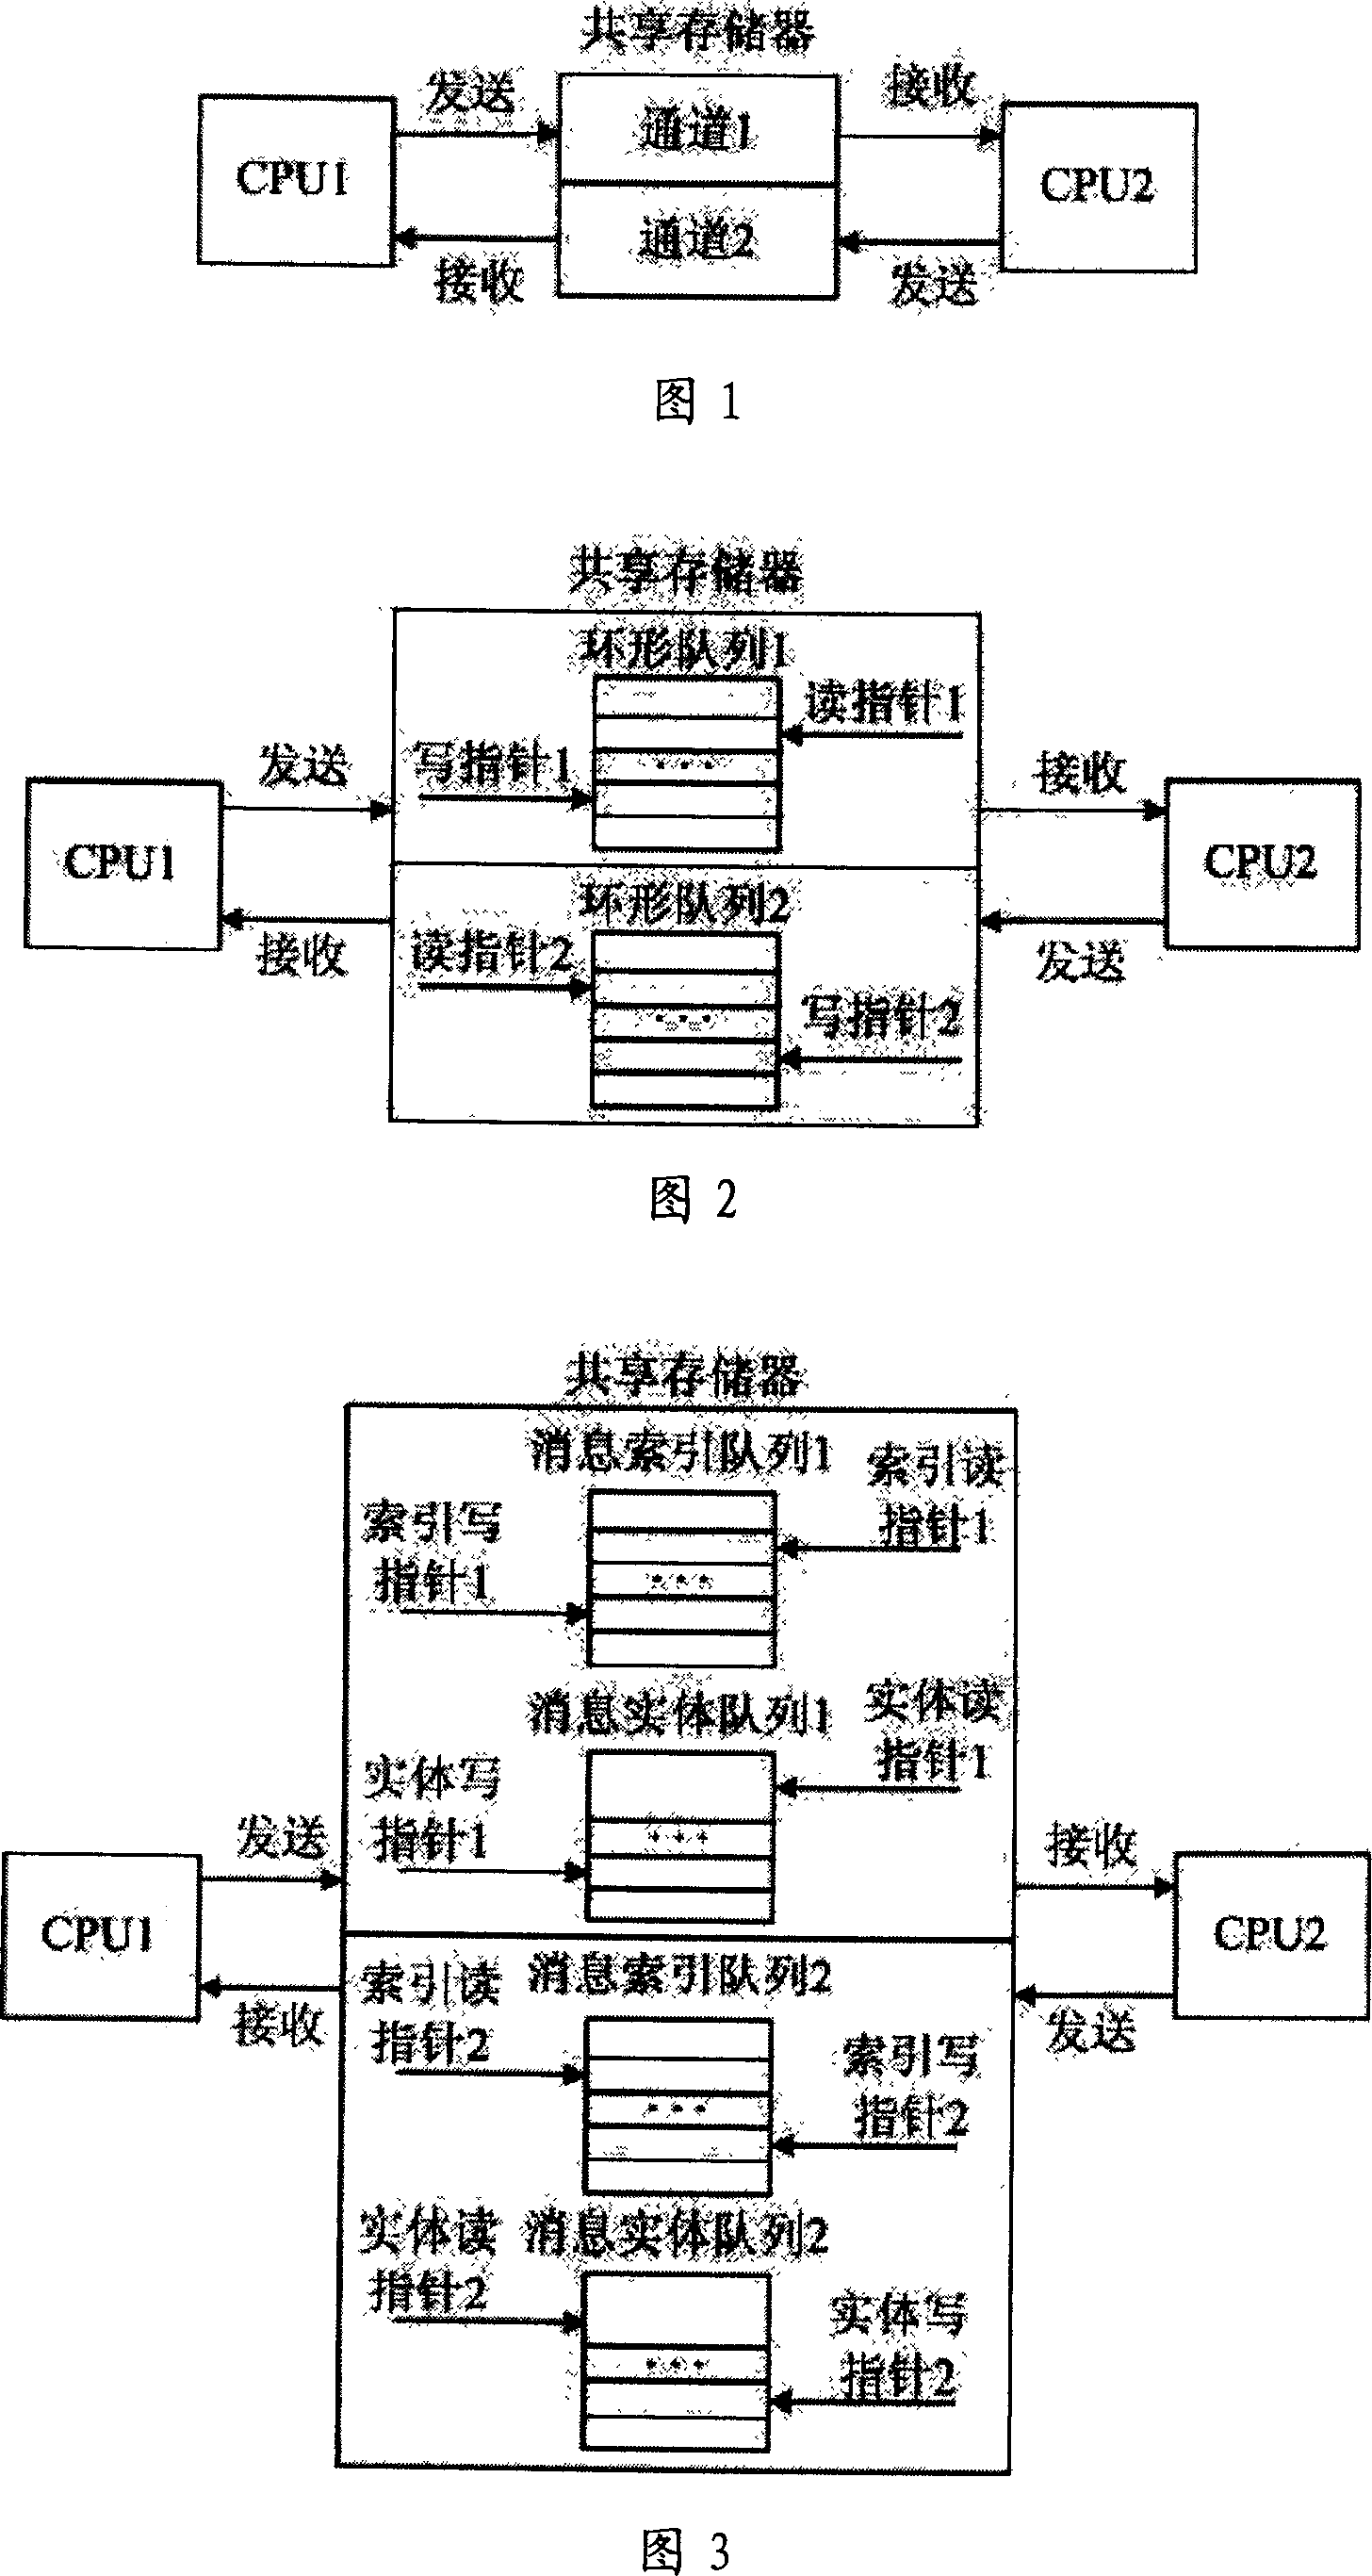 Double CPU communication method based on shared memory